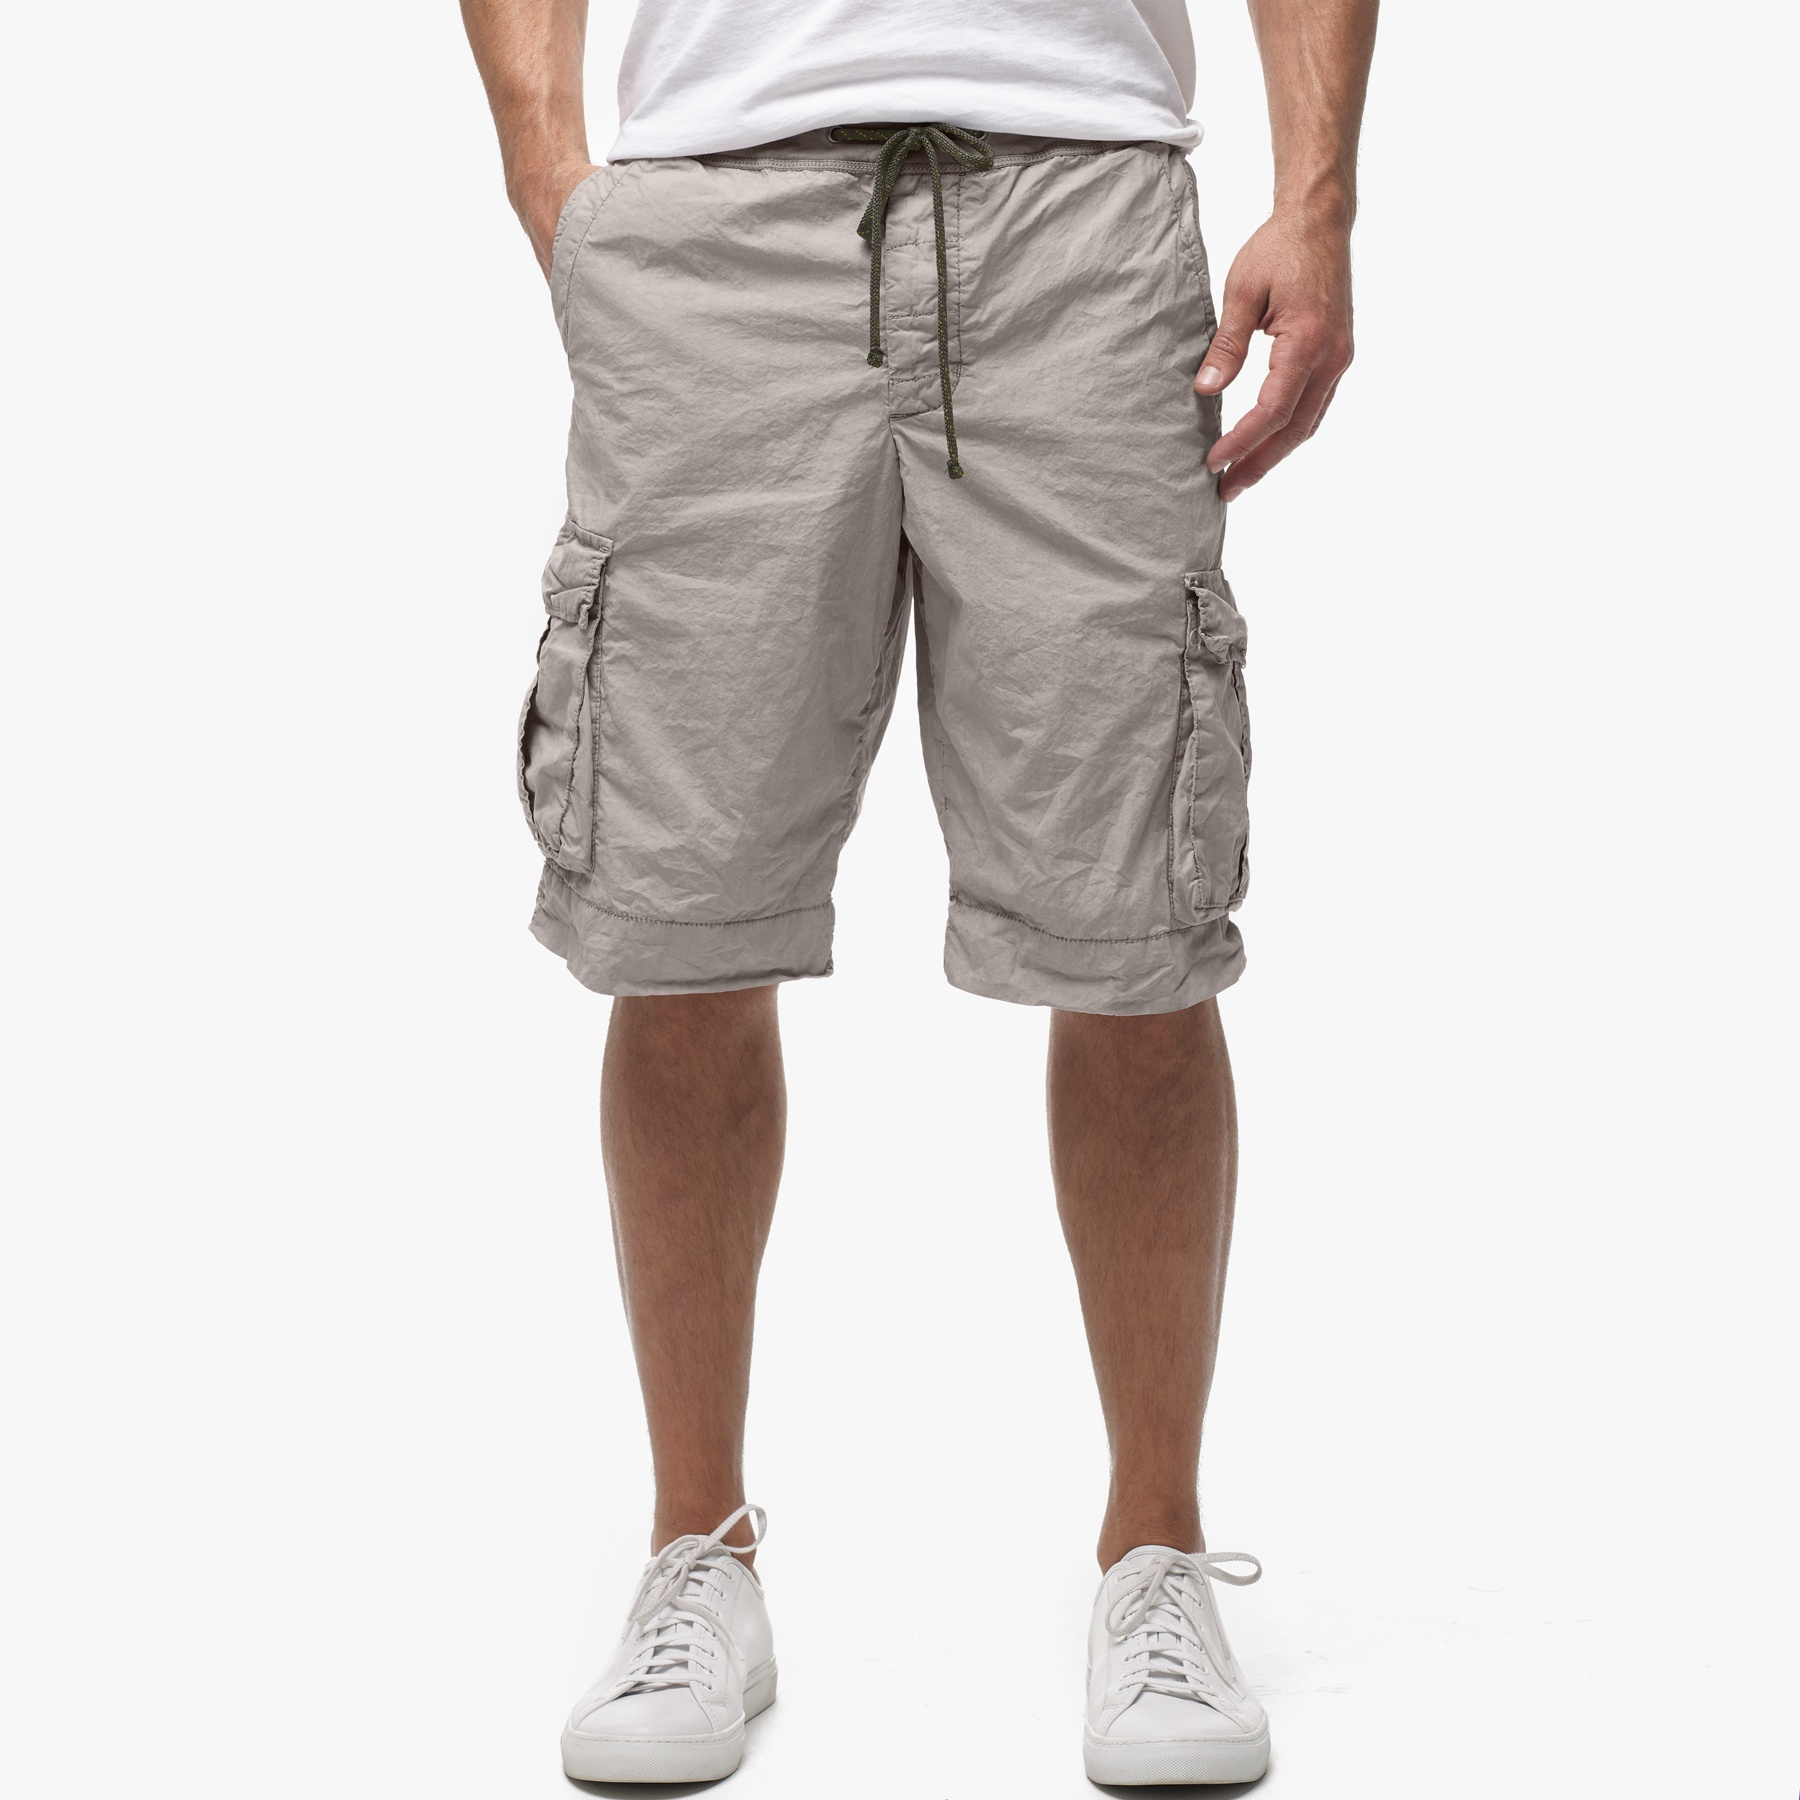 Lyst - James Perse Yosemite Cargo Short in Gray for Men